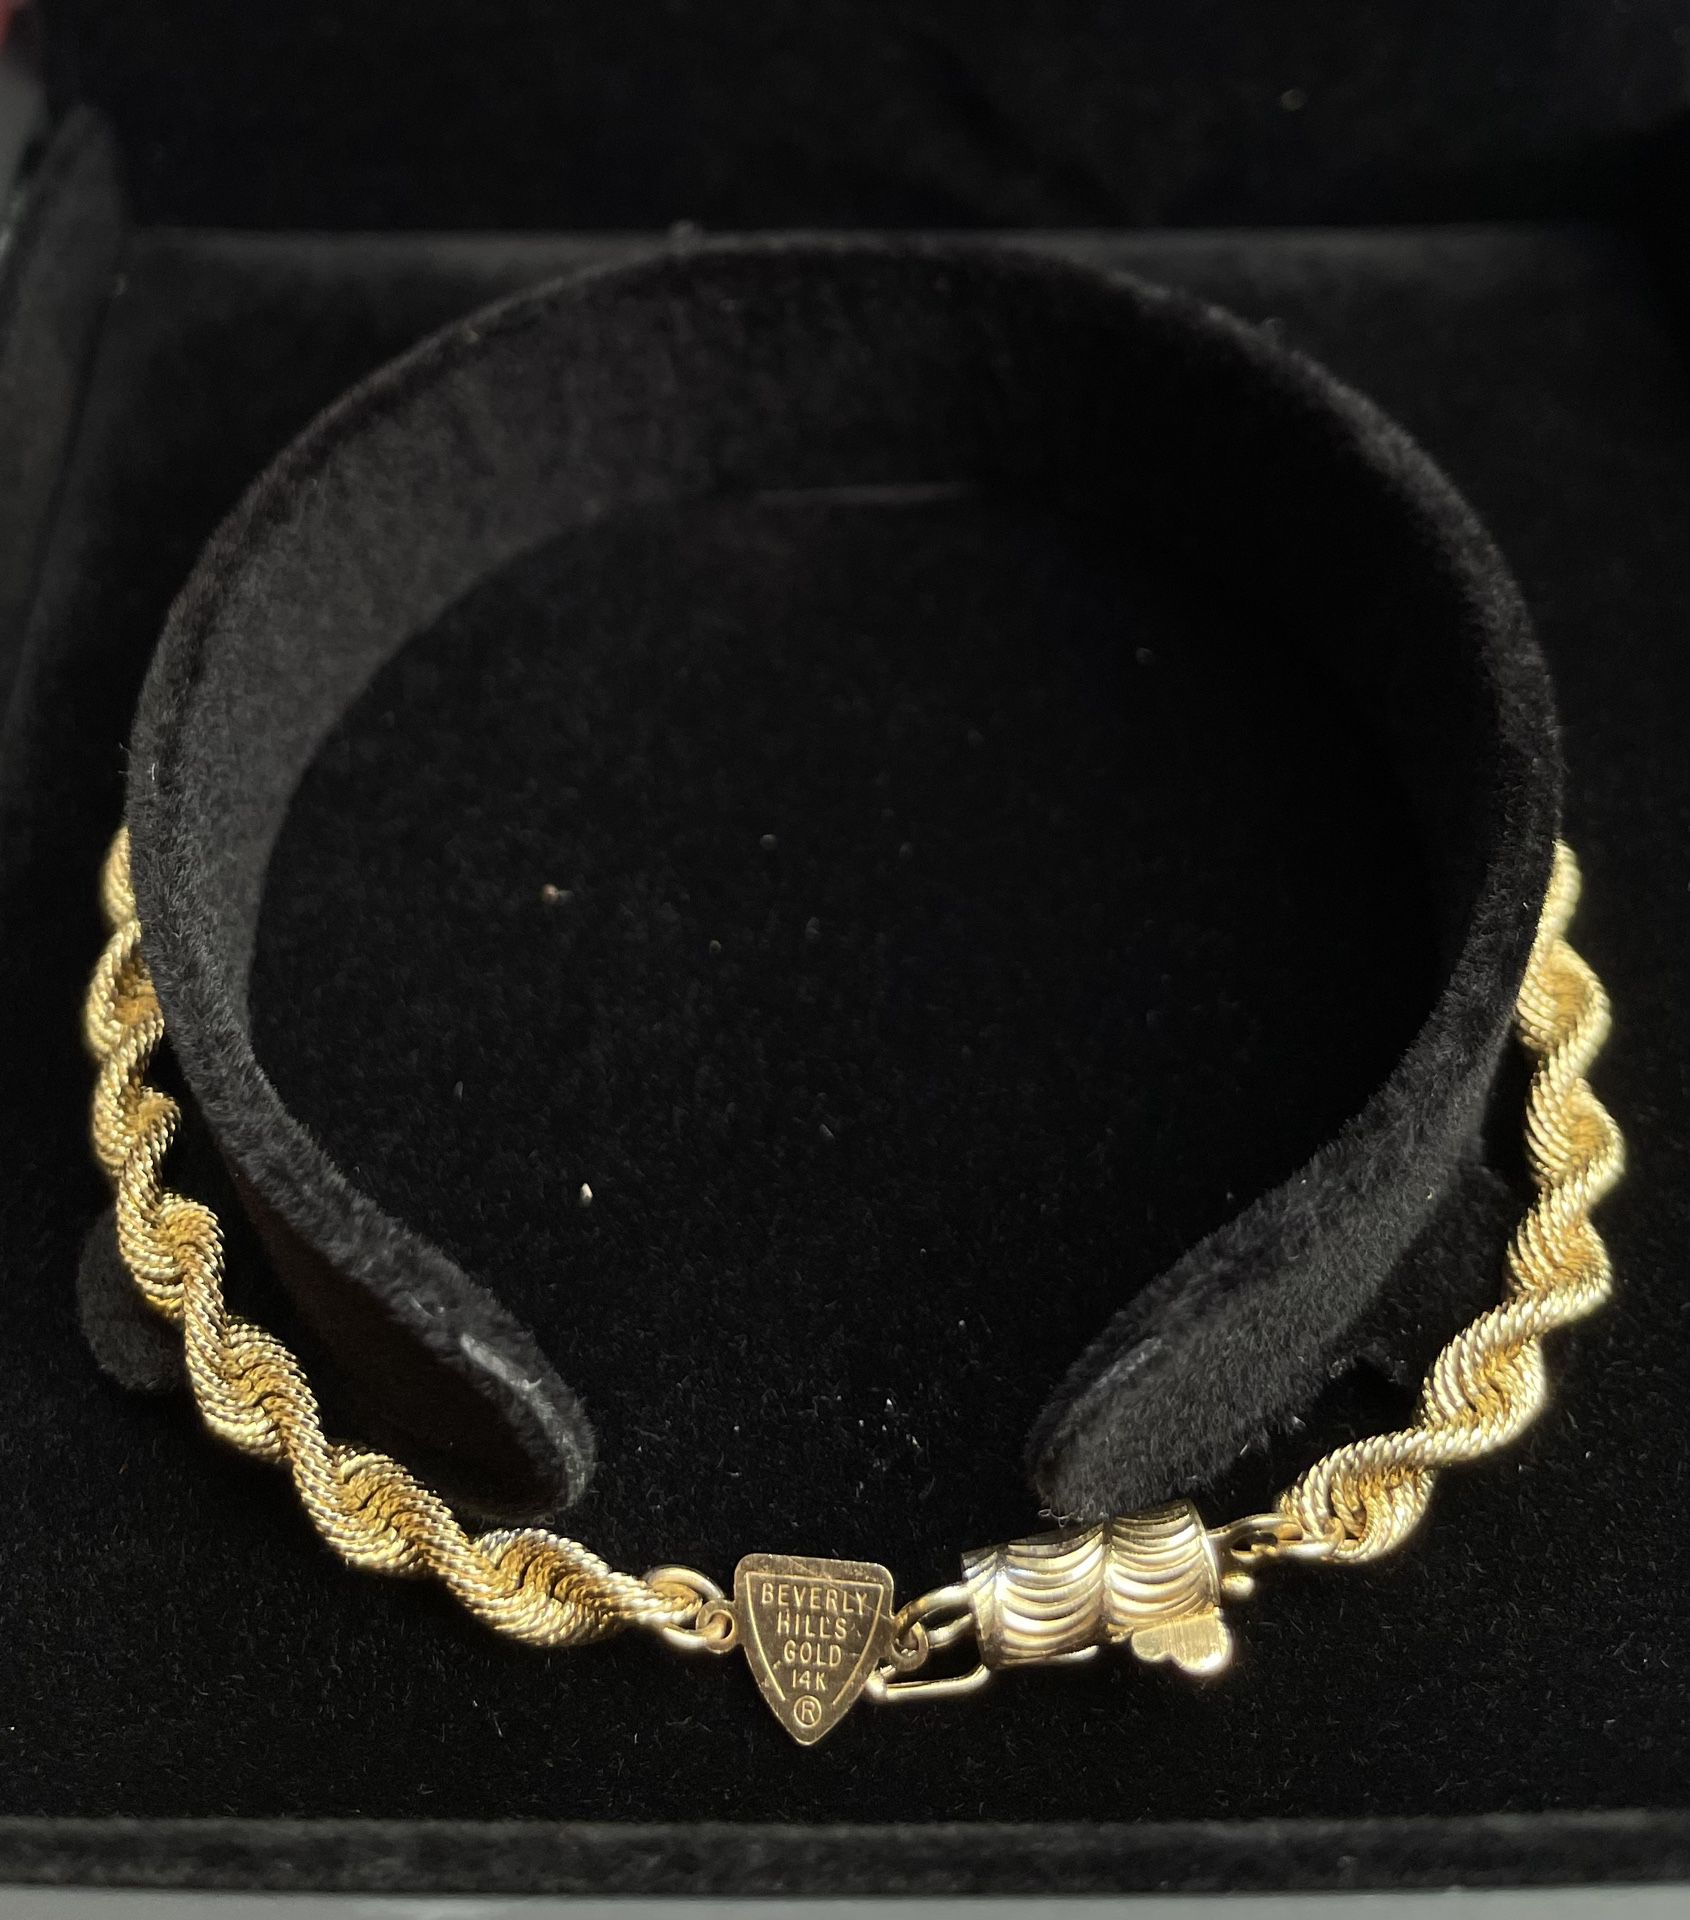 Solid gold 14K bracelet (like new) with barrel clasp from Beverly Hills Jewelry Company